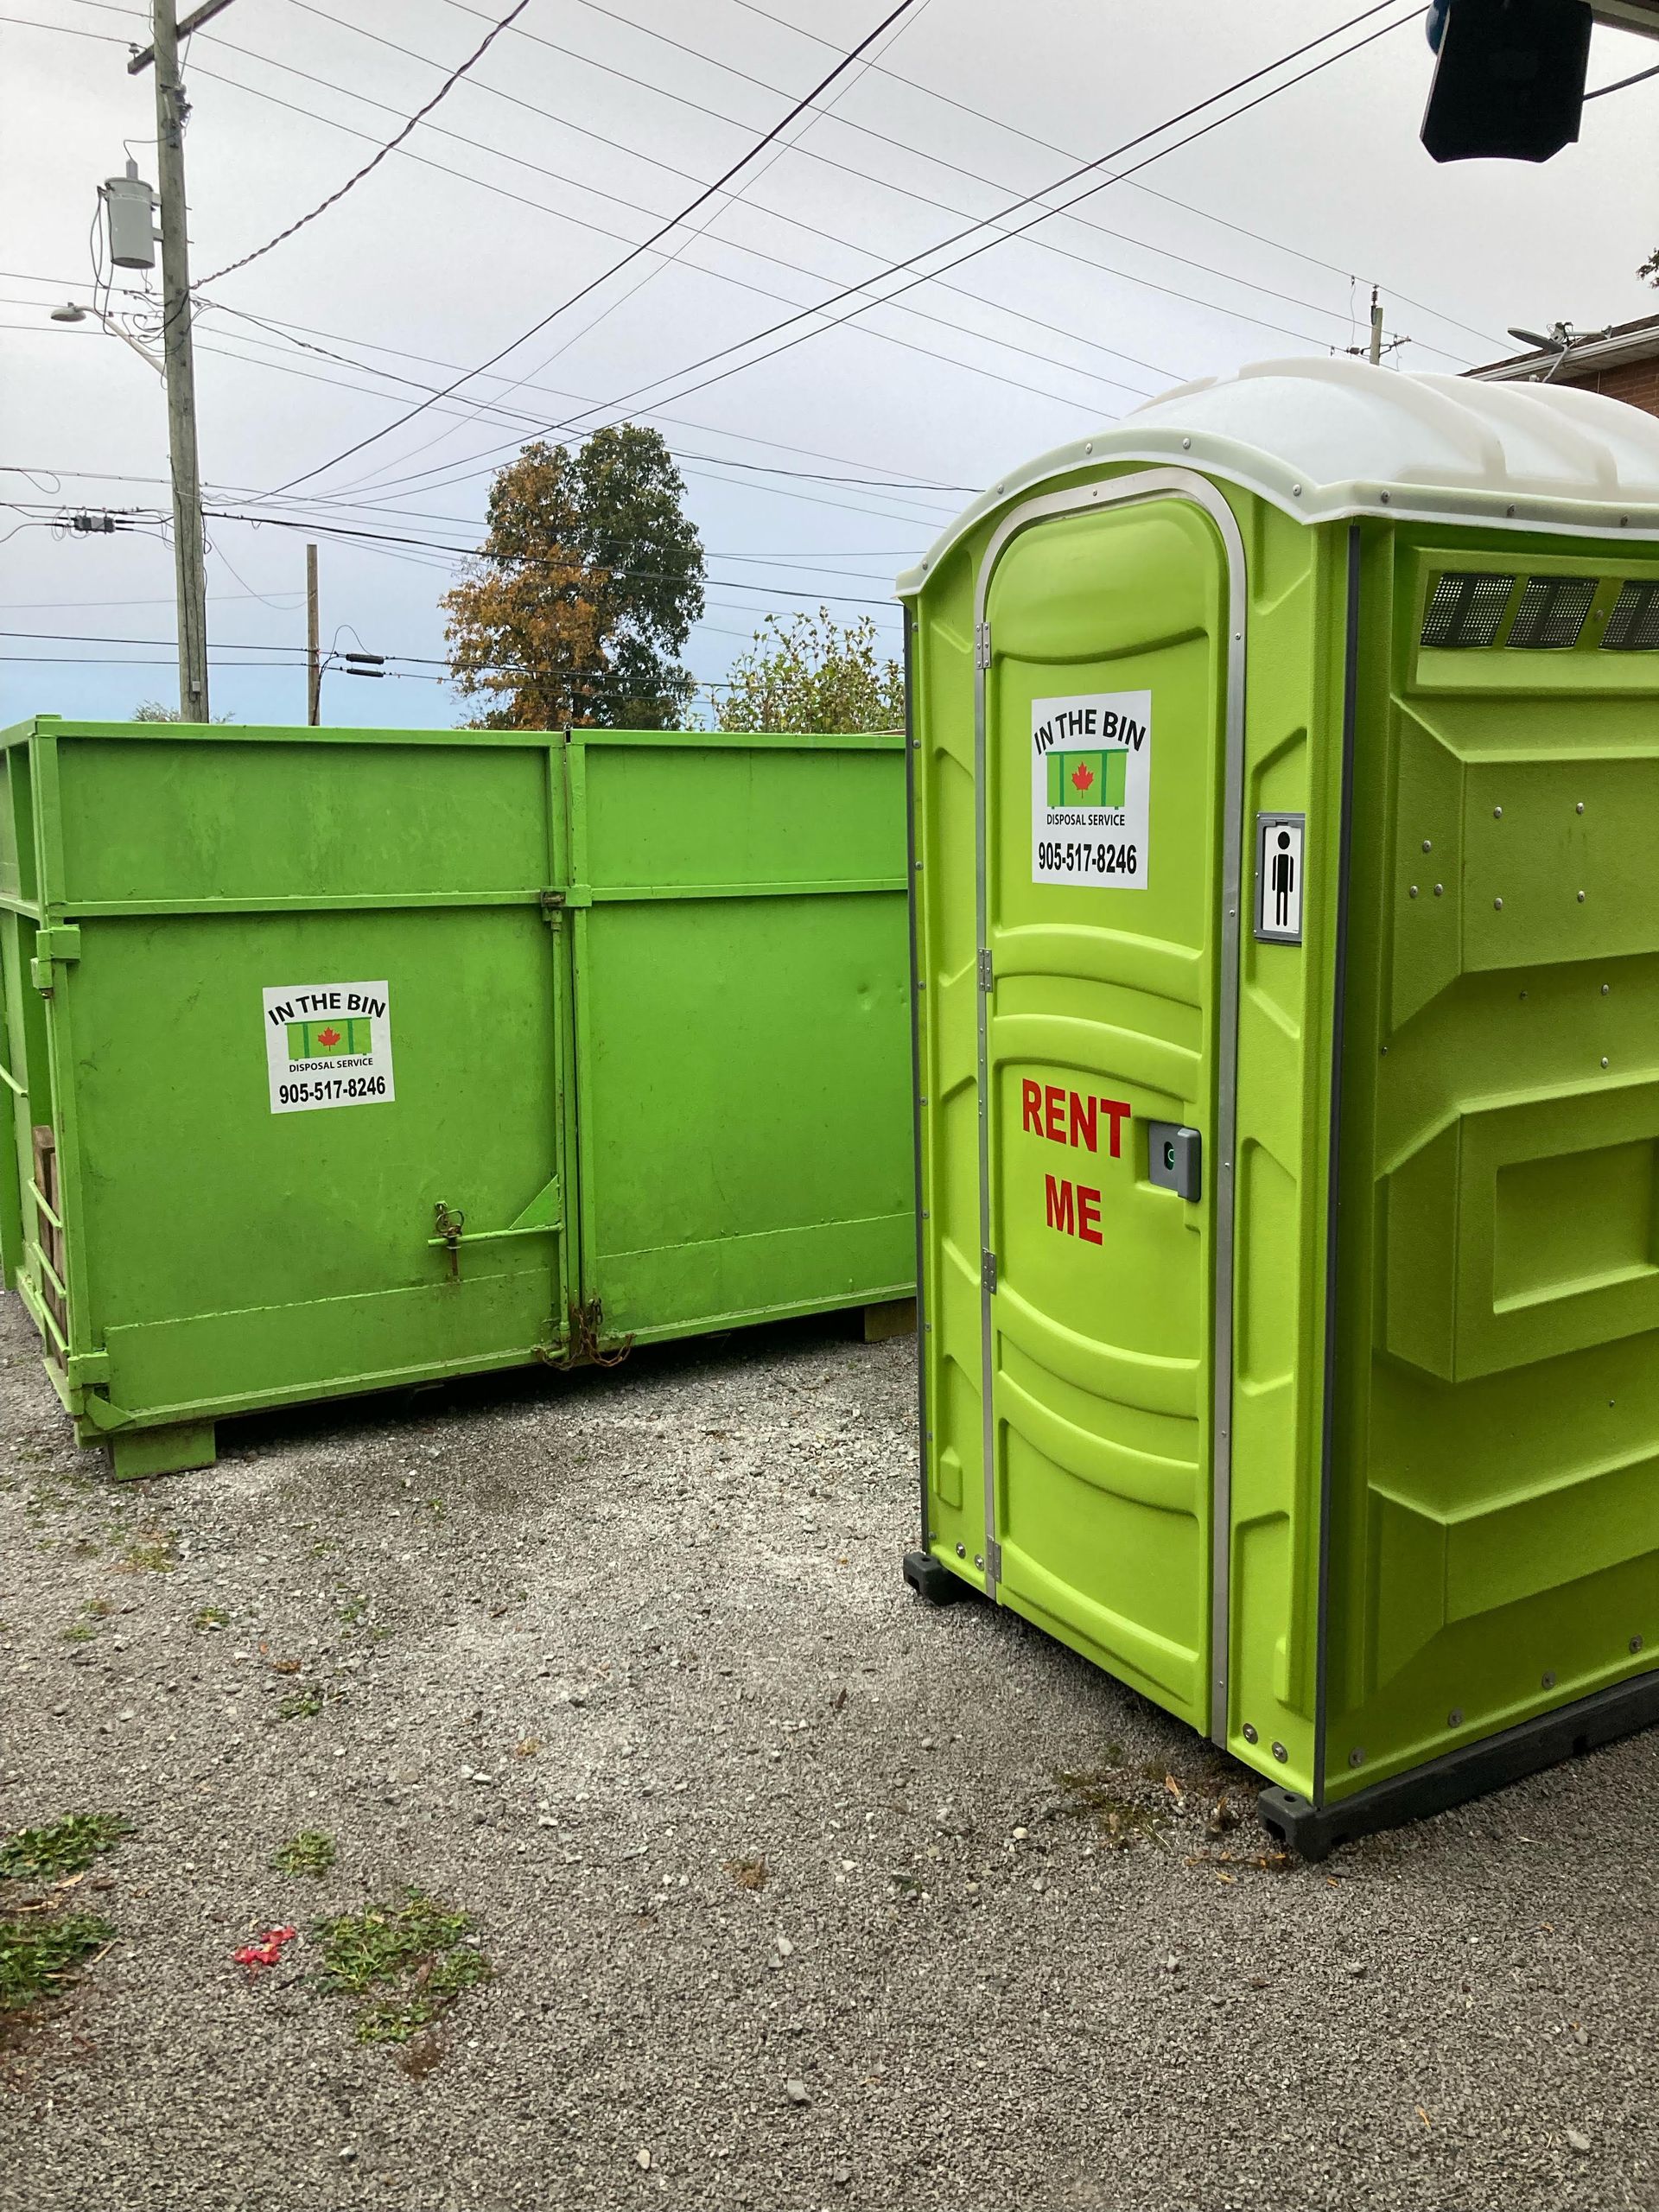 a green dumpster and a green portable toilet are parked next to each other .